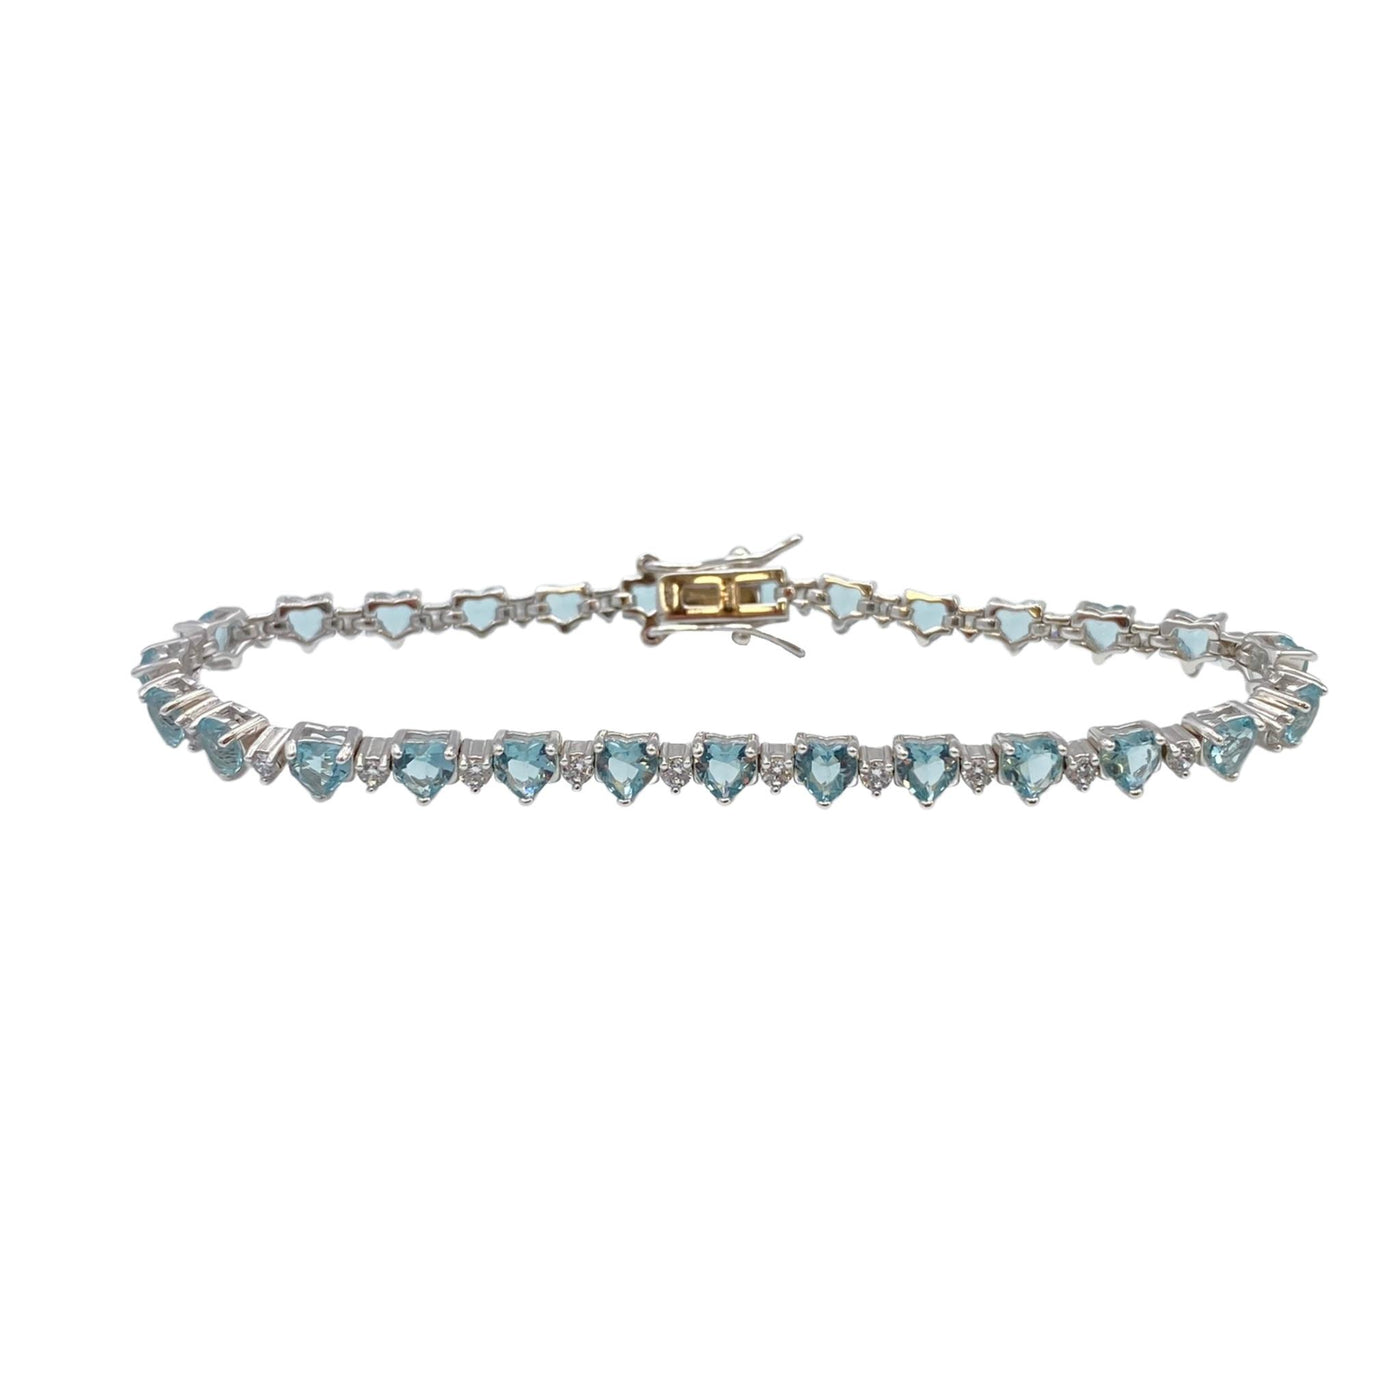 Silver tennis bracelet with hearts